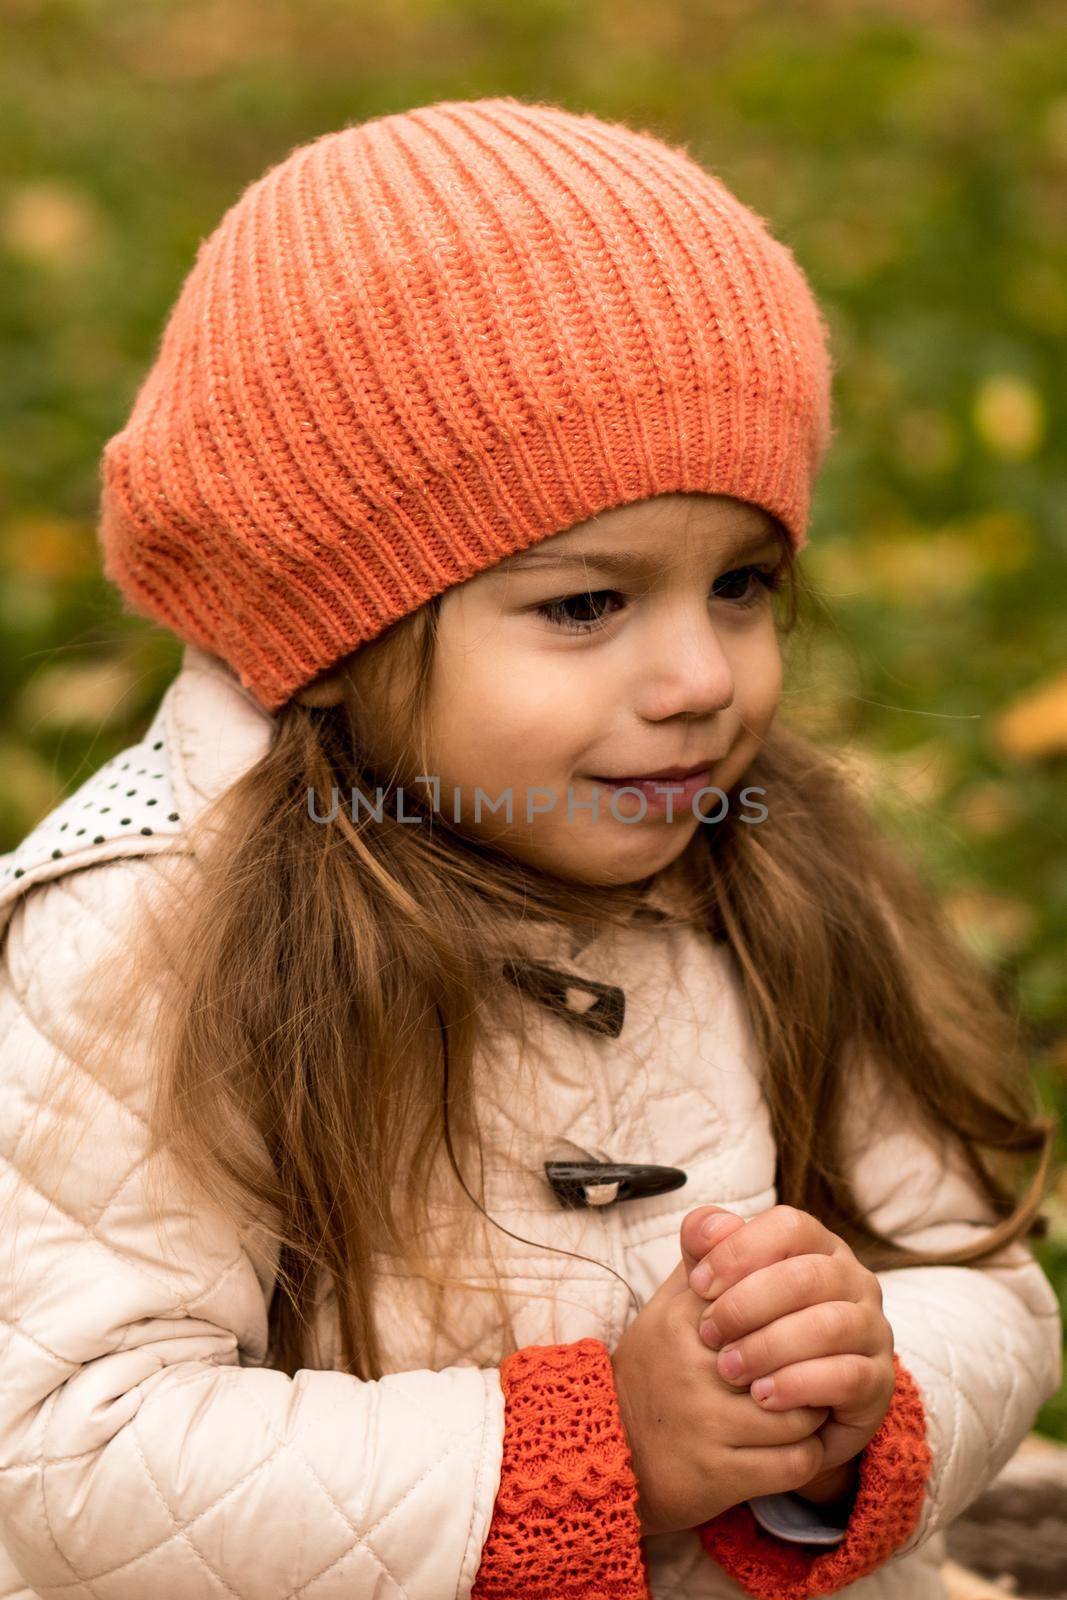 Little Cute Preschool Minor Brunette Girl In Orange Beret Sits On Plaid Covers Dace With Yellow Fallen Maple Leaves In Cold Weather In Fall Park. Childhood, Family, Infant, Motherhood, Autumn Concept